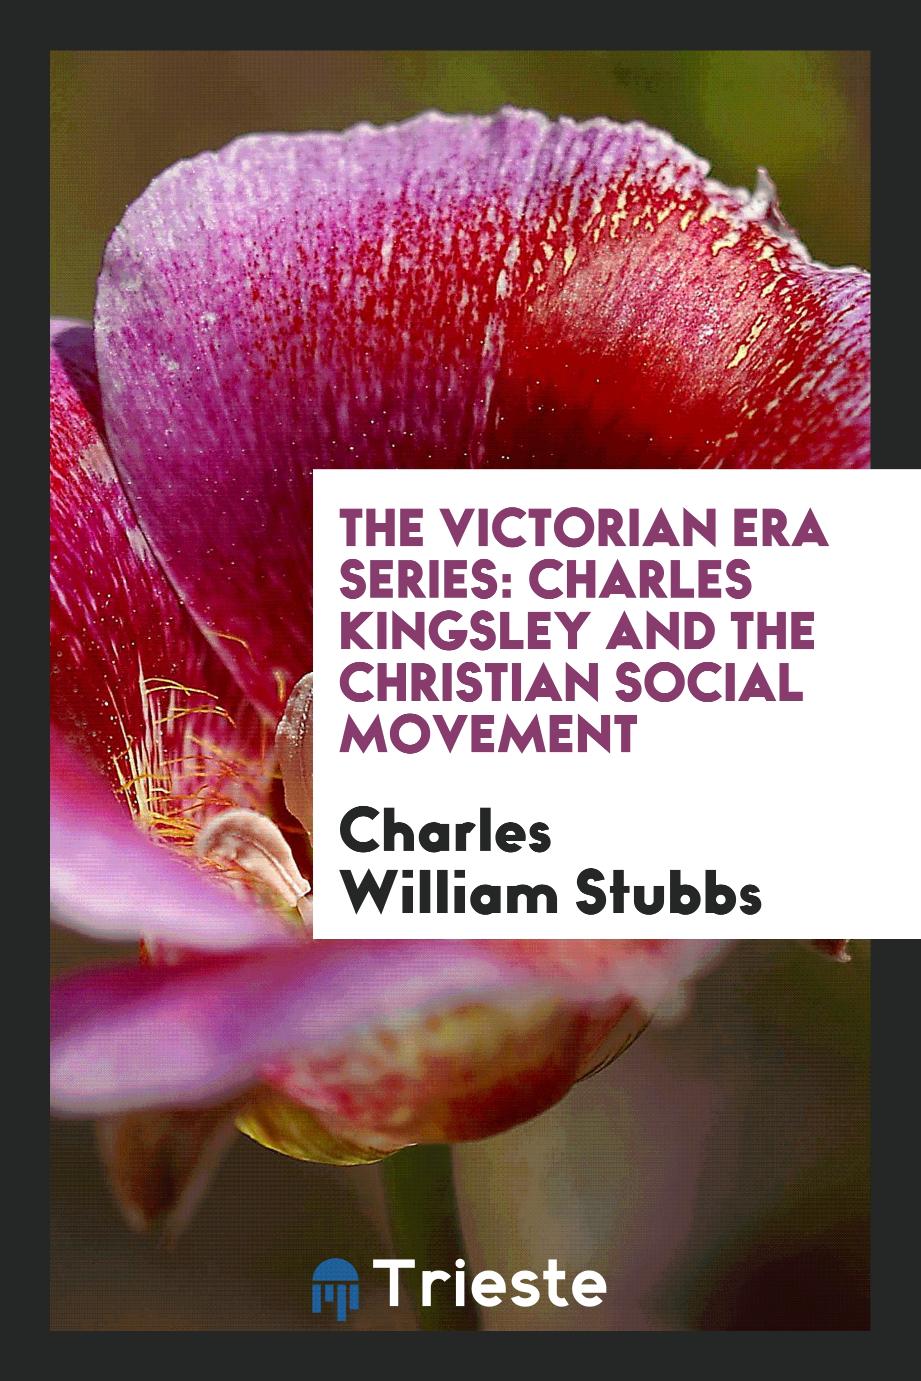 The Victorian Era Series: Charles Kingsley and the Christian Social Movement